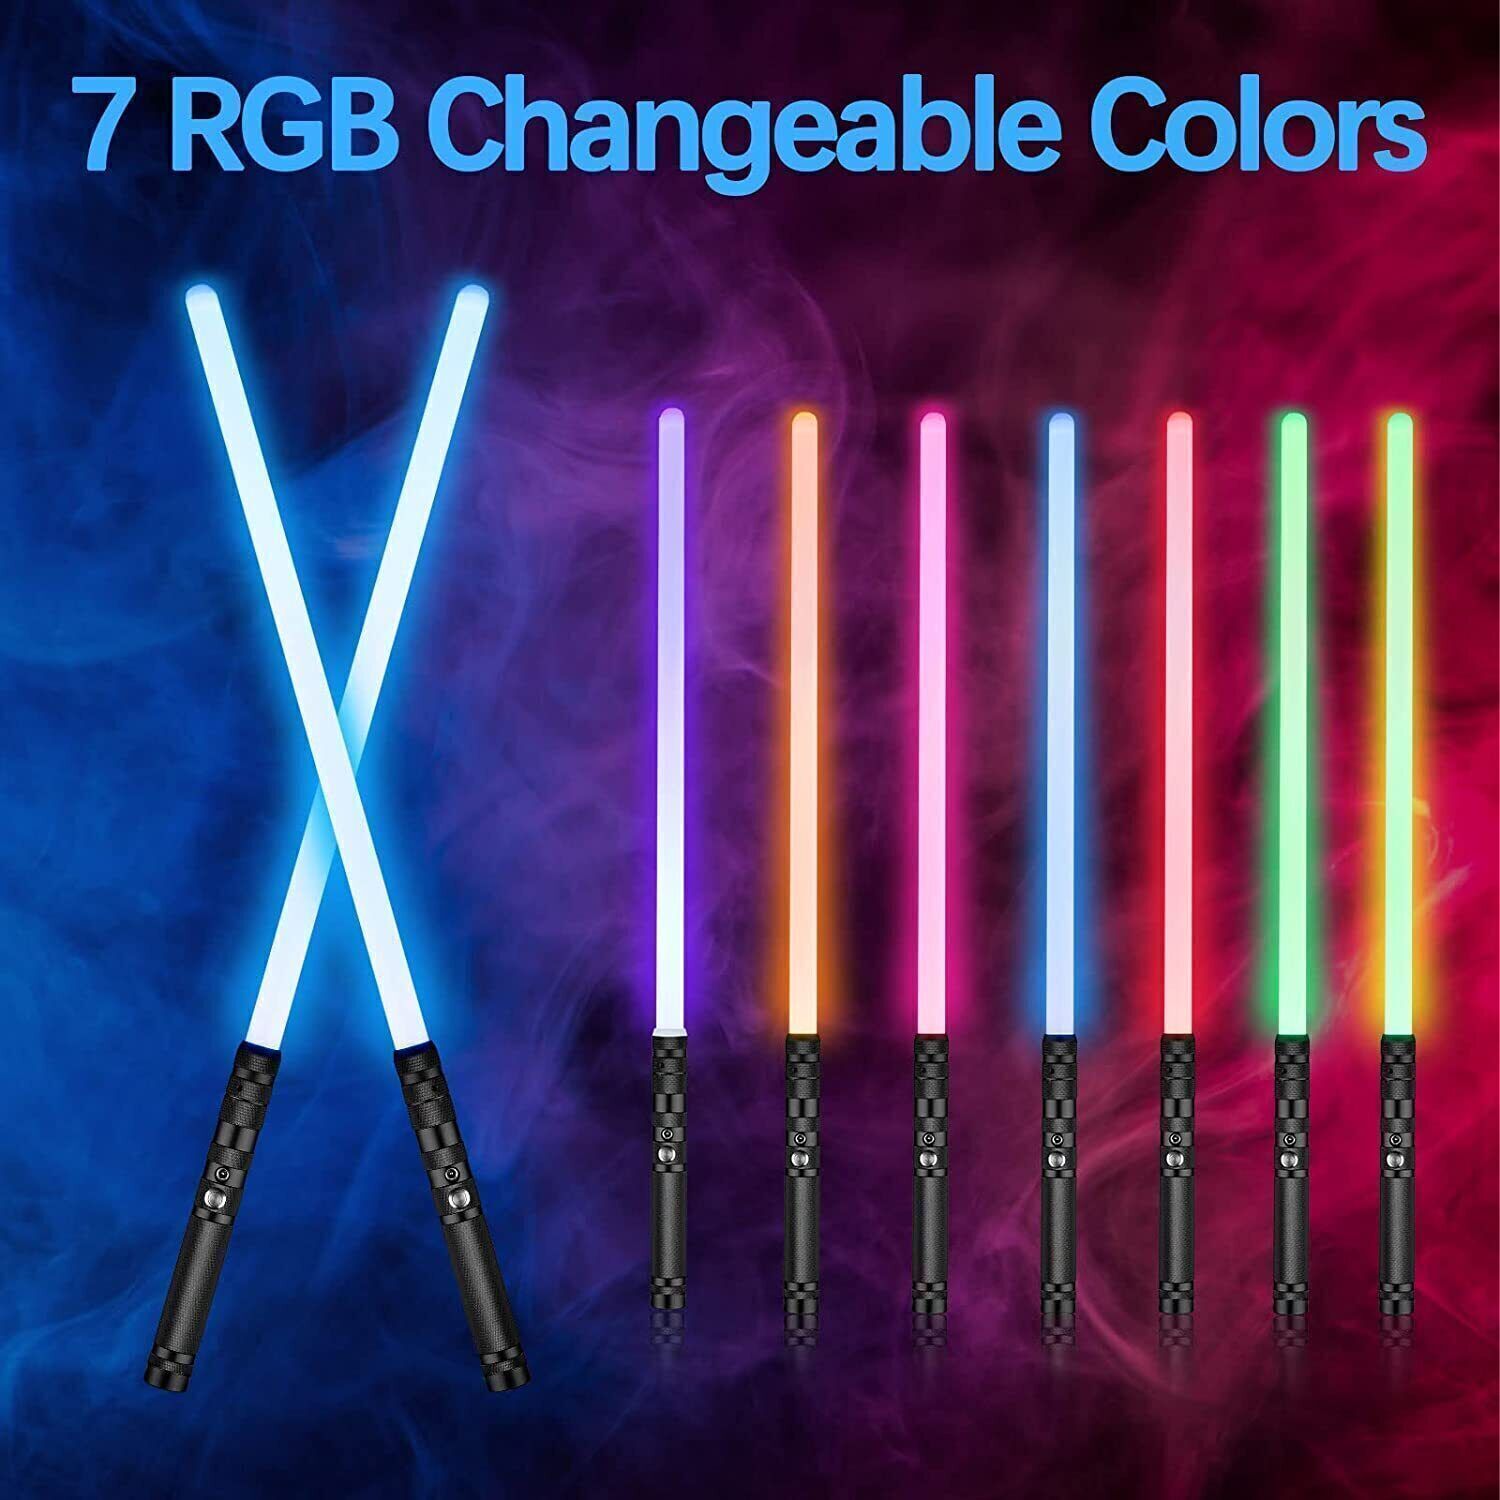 Rechargeable FX Dueling Lightsaber Realisic Sound Effects 7 Color Switching Gift